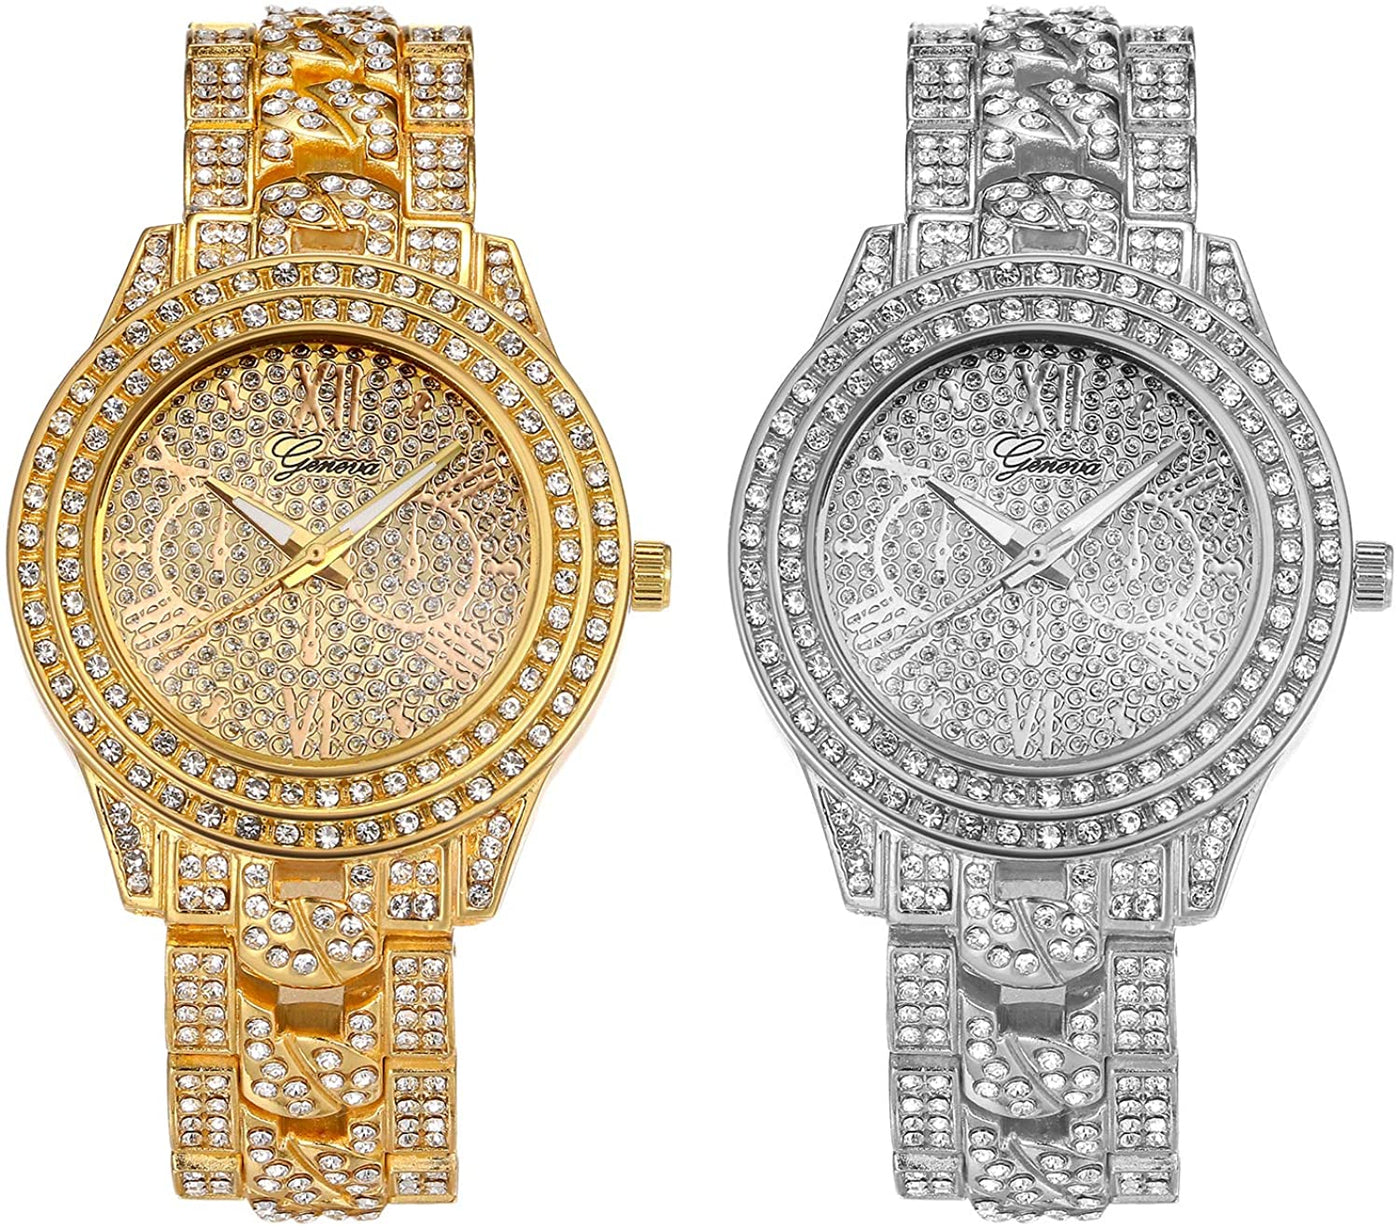 2 Pack Iced Out Watch for Men Rhinestone Bling Dial Crystal Bracelet Bangle Quartz Punk Hip-hop Dress Wrist Watch with Stainless Steel Band for Halloween Costume Party